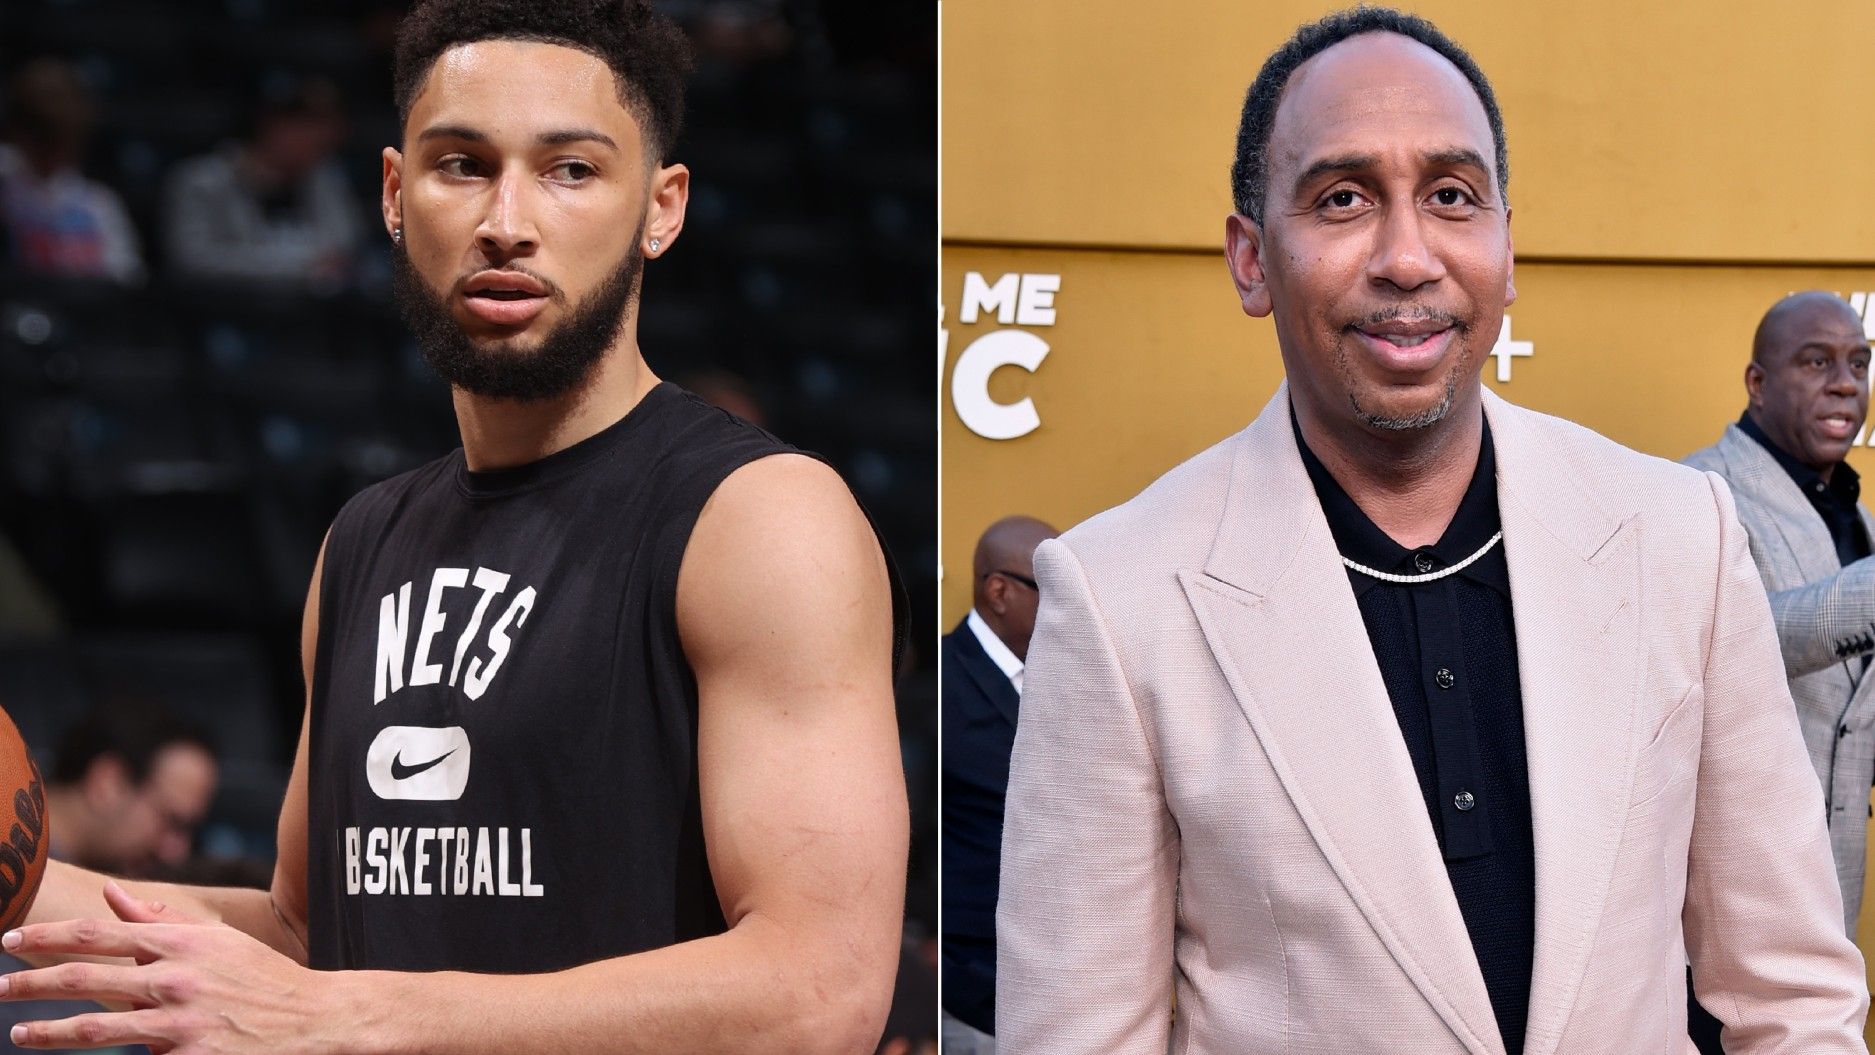 Ben Simmons called 'weak and pathetic' ahead of game four of NBA play-off series